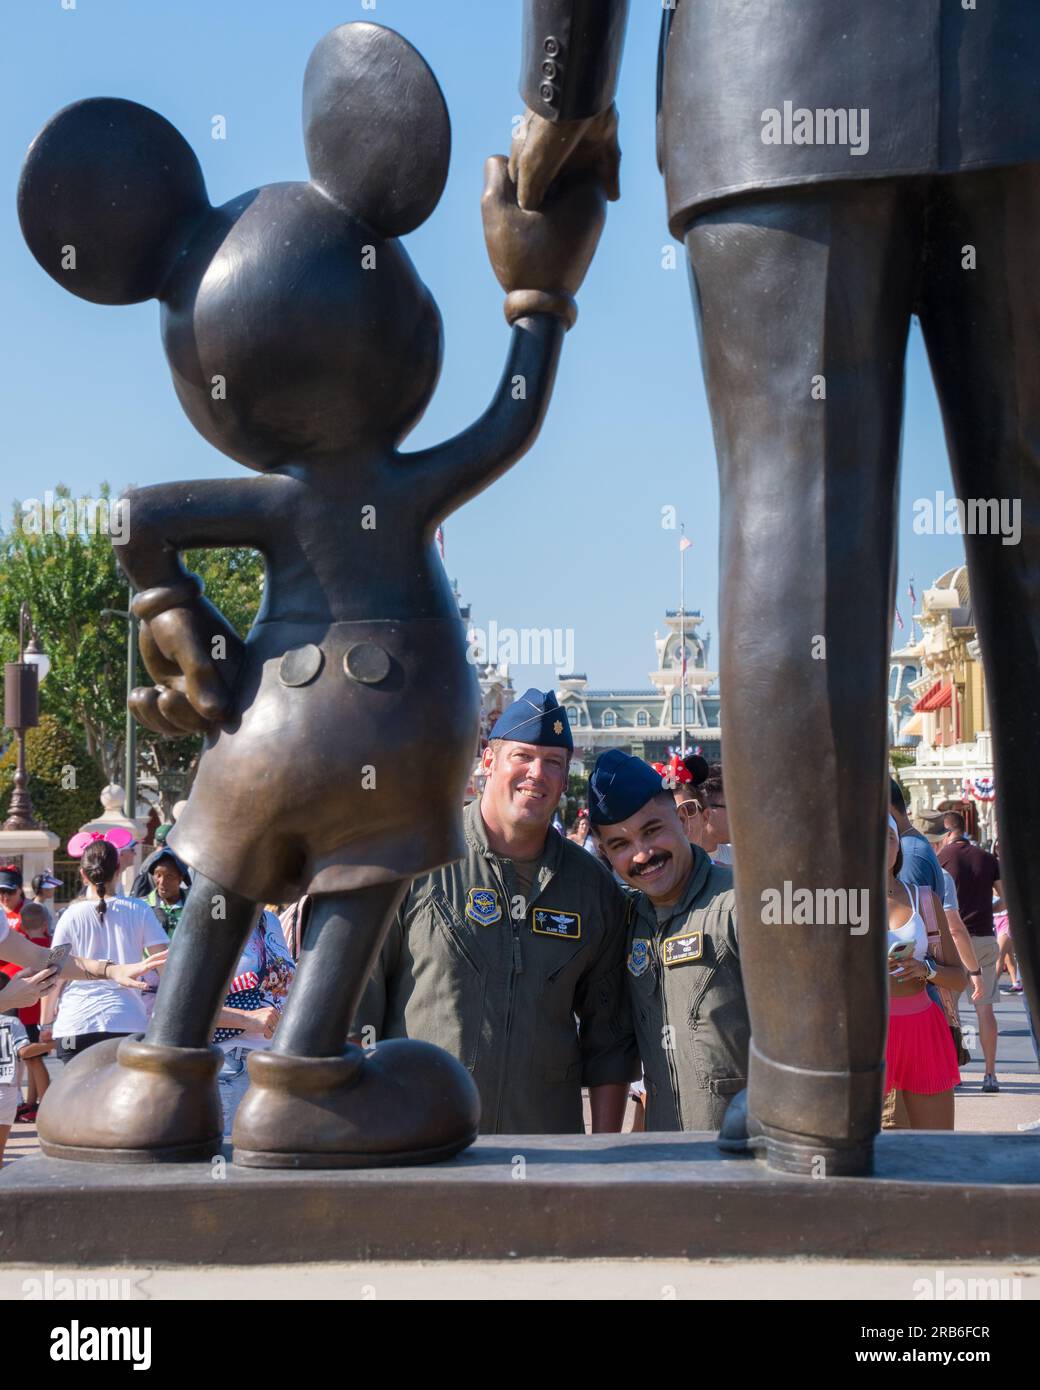 Orlando, United States. 04 July, 2023. U.S. Air Force Maj. Clark Hall, 91st Air Refueling Squadron pilot, left, and Staff Sgt. Juan Ramirez Ceballos, 91st ARS boom operator, look at the Mickey Mouse and Walt Disney statue during a flyover by their teams at Disney World, July 4, 2023 in Orlando, Florida, July 4, 2023. The flyover celebrated Independence Day and the 100th anniversary of Walt Disney Company.    Credit: SrA Joshua Hastings/U.S. Air Force/Alamy Live News Stock Photo